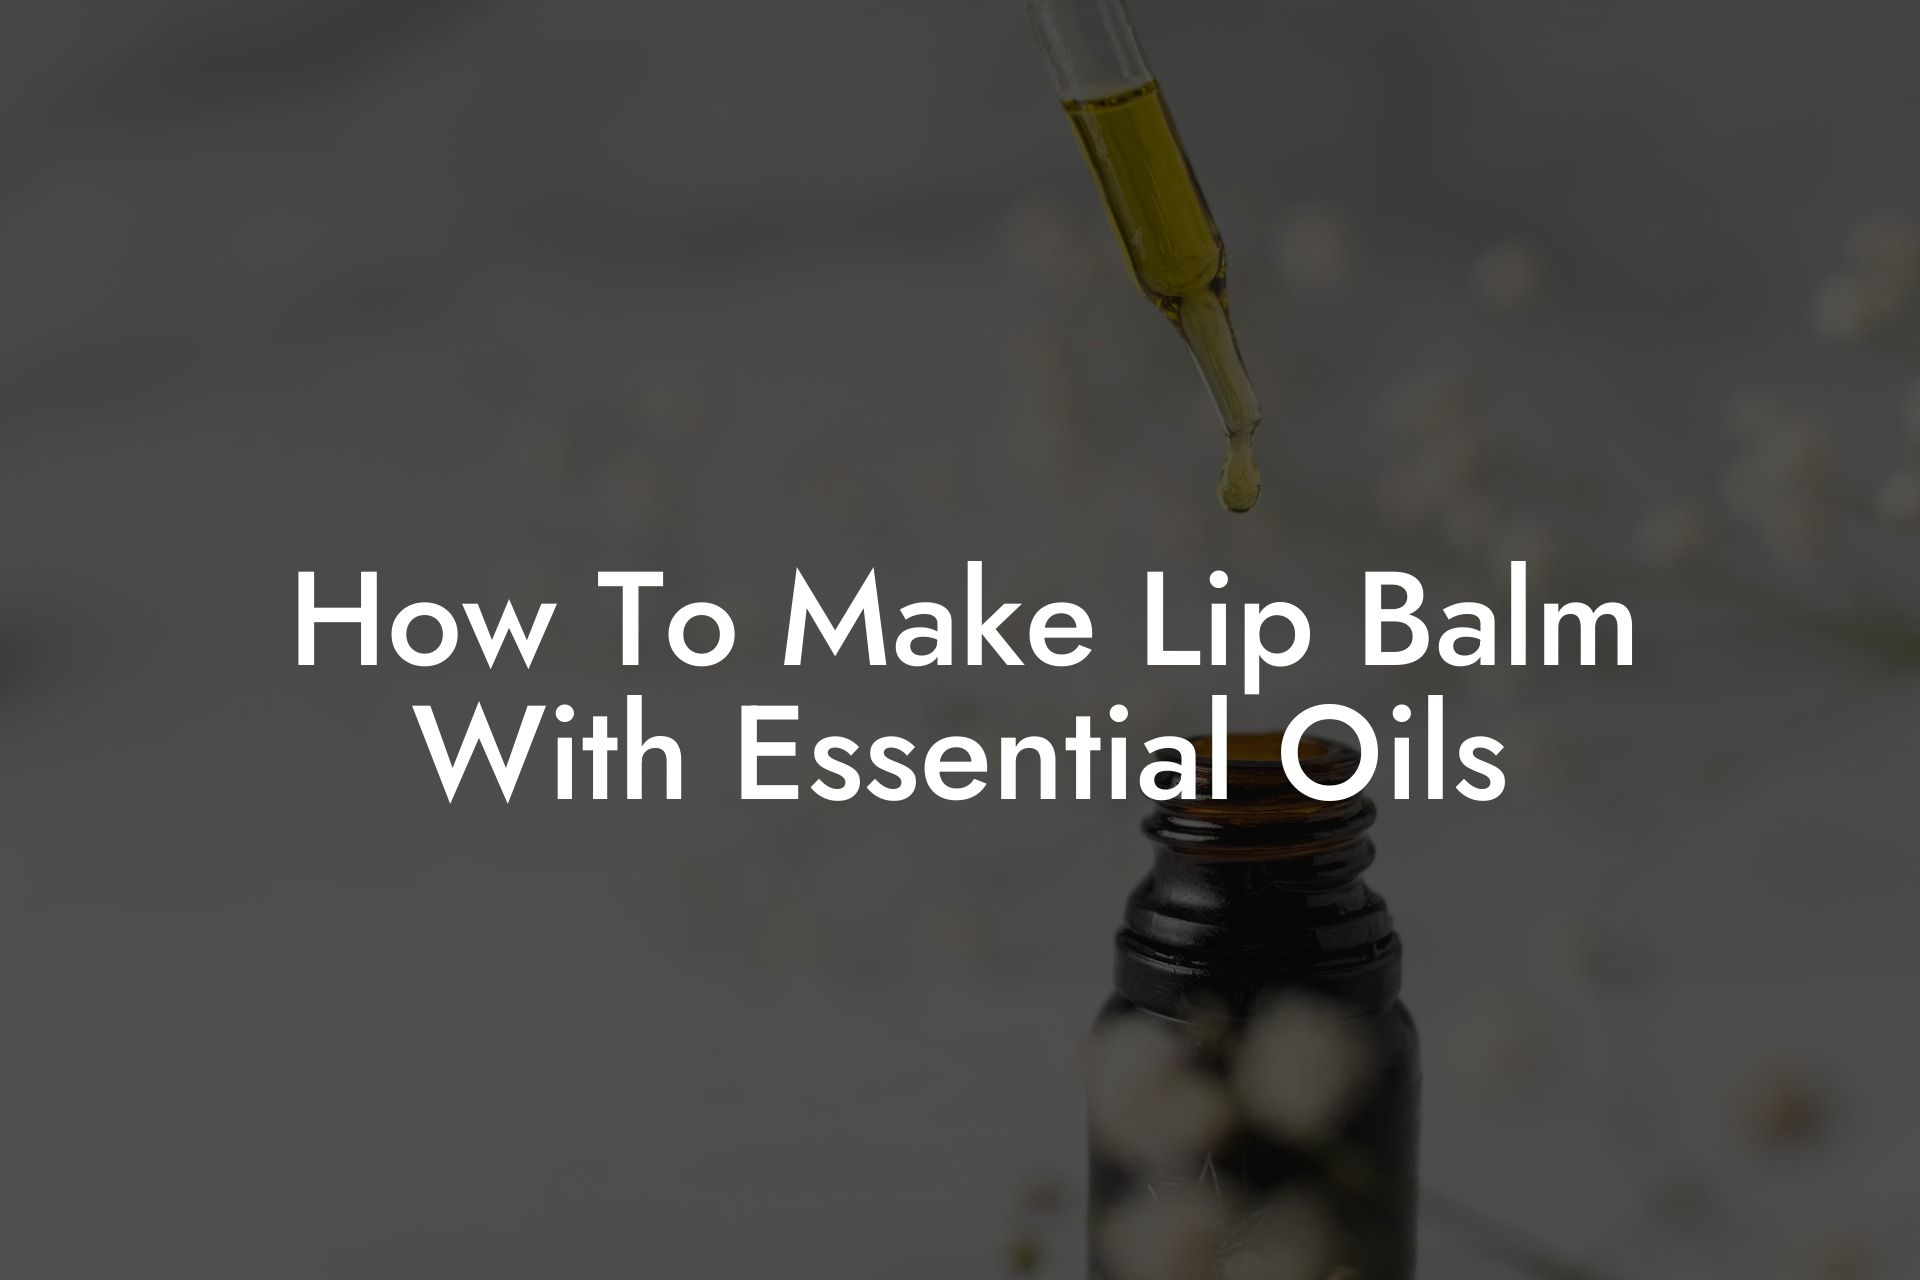 How To Make Lip Balm With Essential Oils